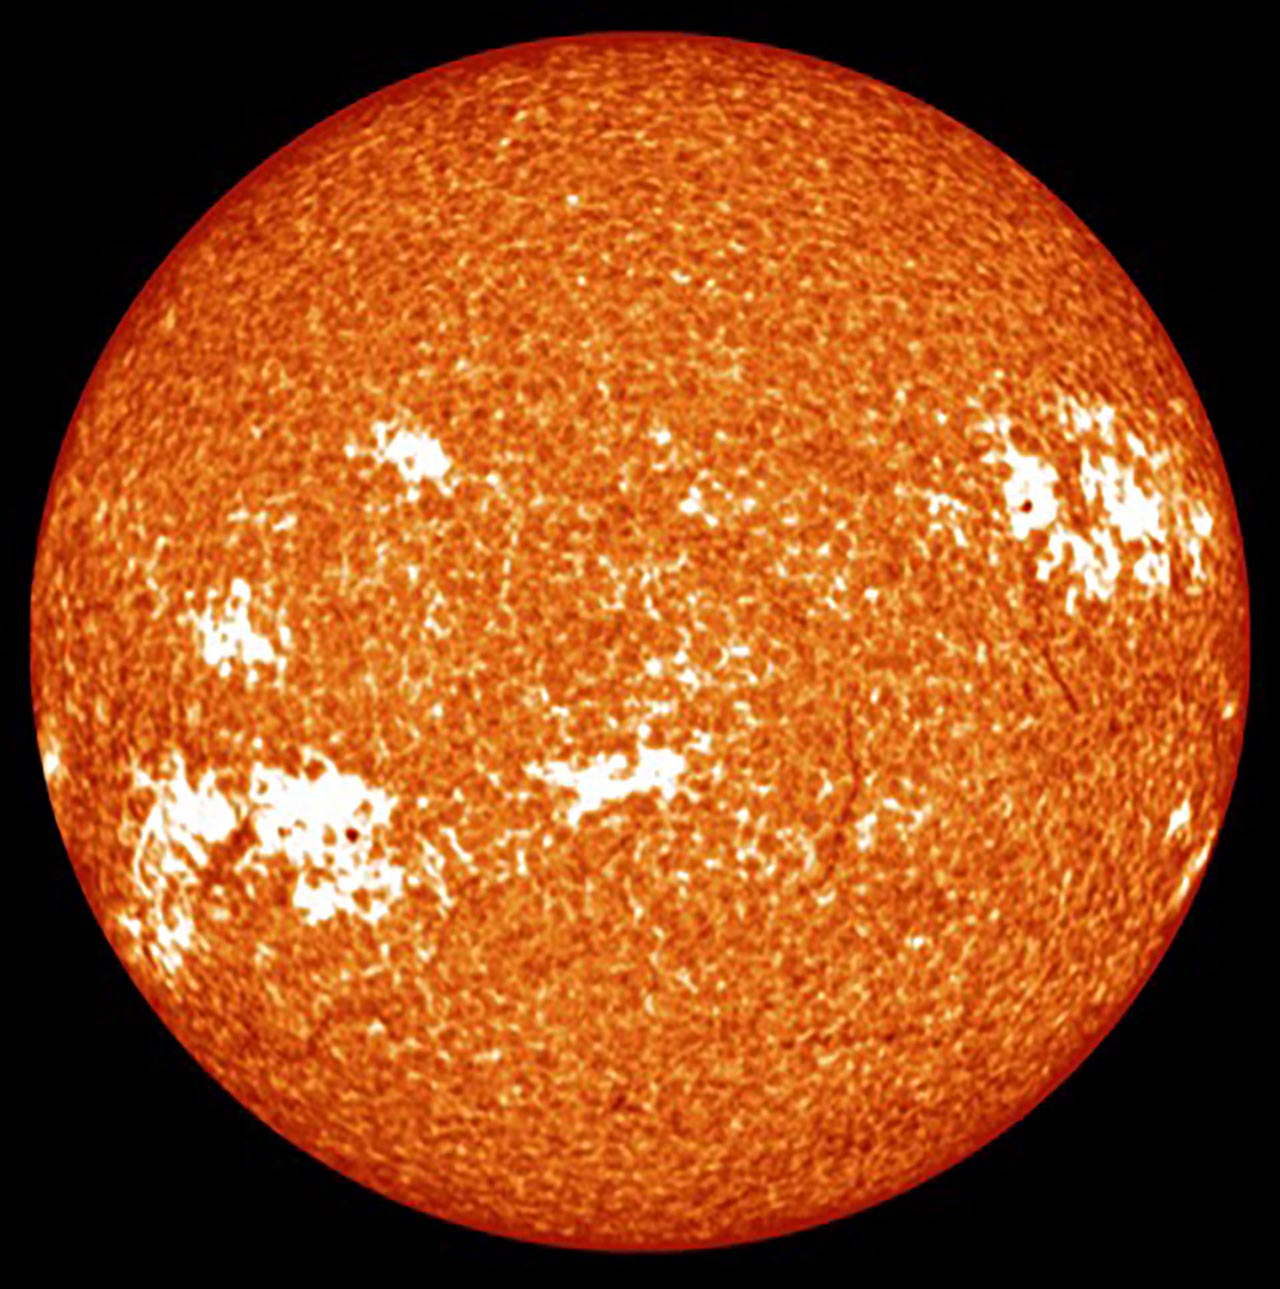  In this image of the solar chromosphere, taken at the center of the CaII K (393 nm) line, plages appear as patchy bright regions typically surrounding dark sunspots. Image taken with the Evans facility spectroheliograph at Sacramento Peak Observatory, NM.